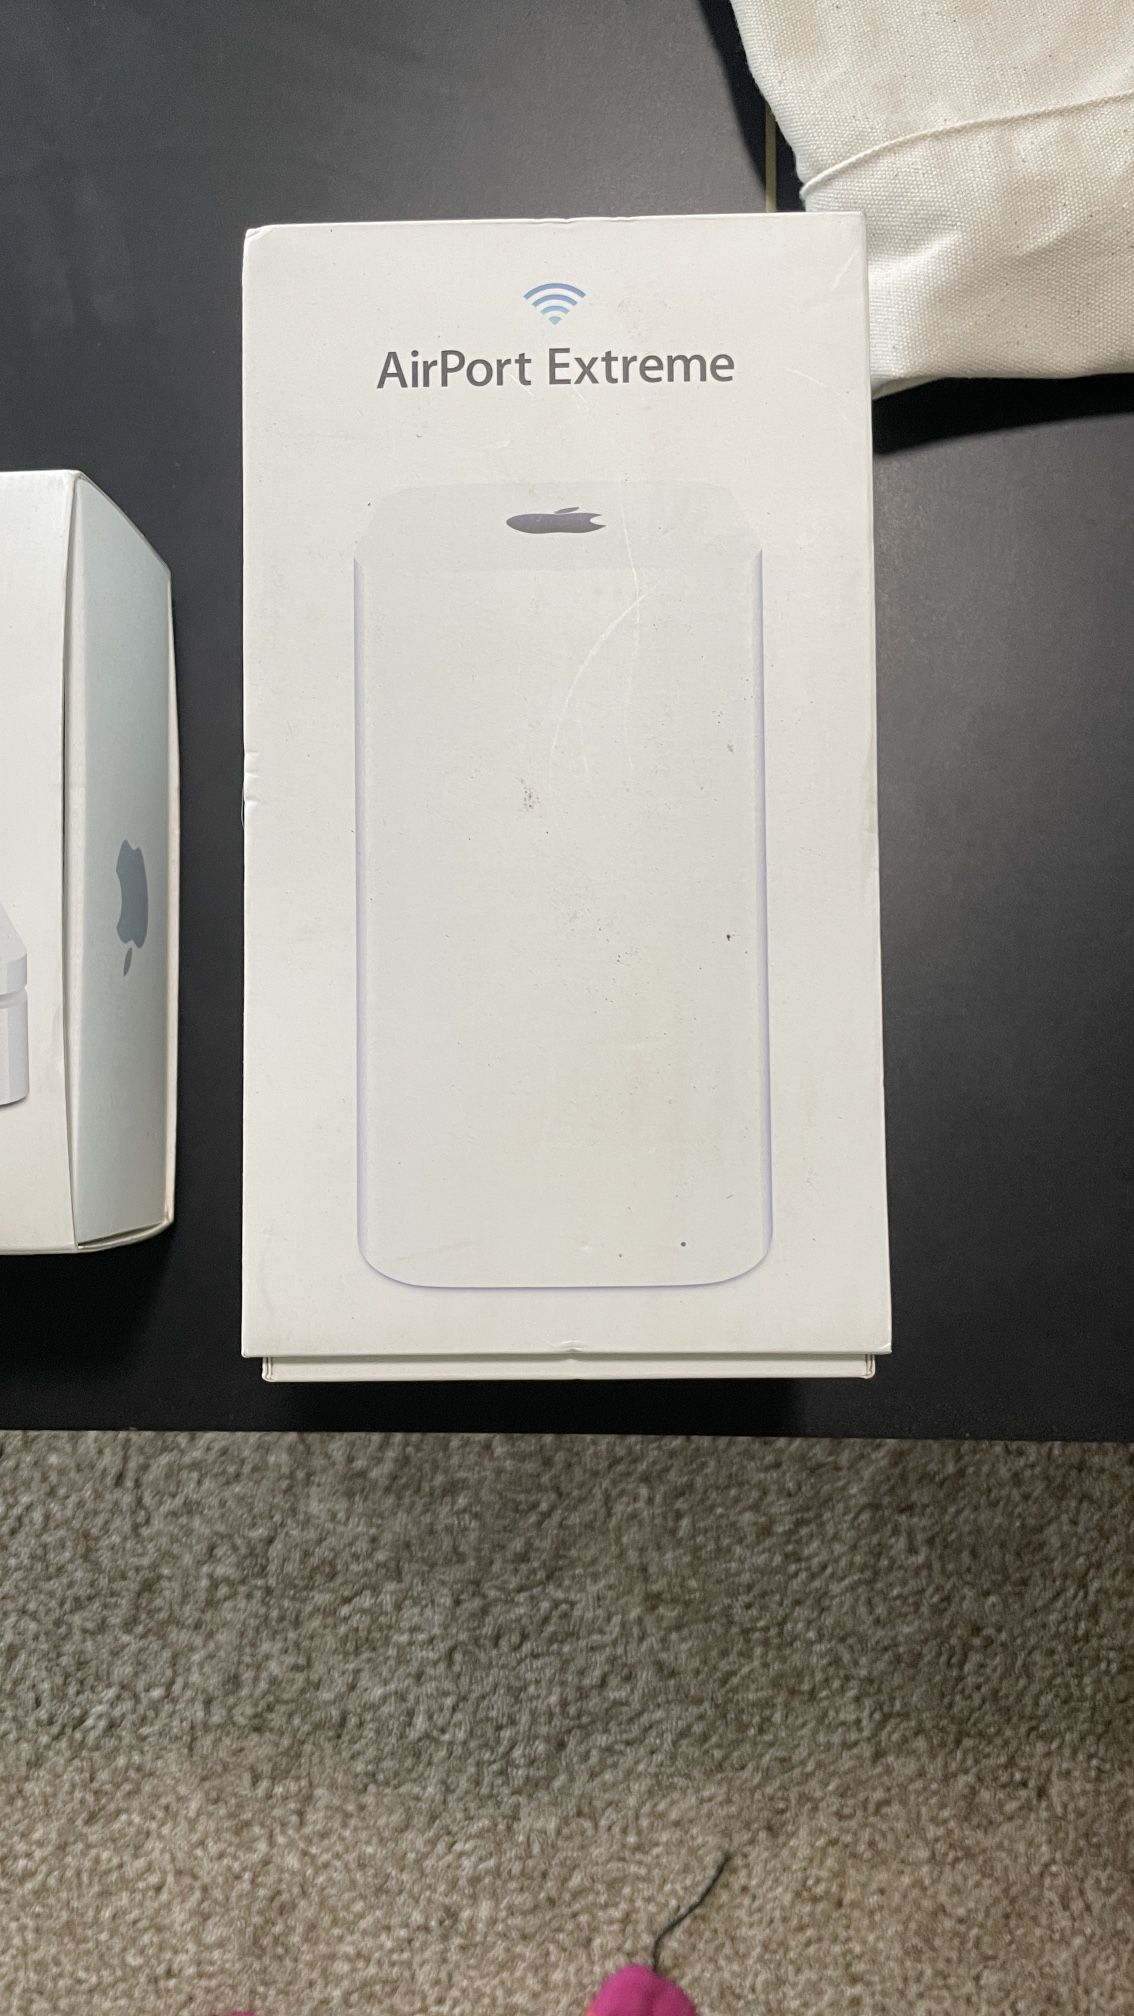 Airport Extreme Wifi Router